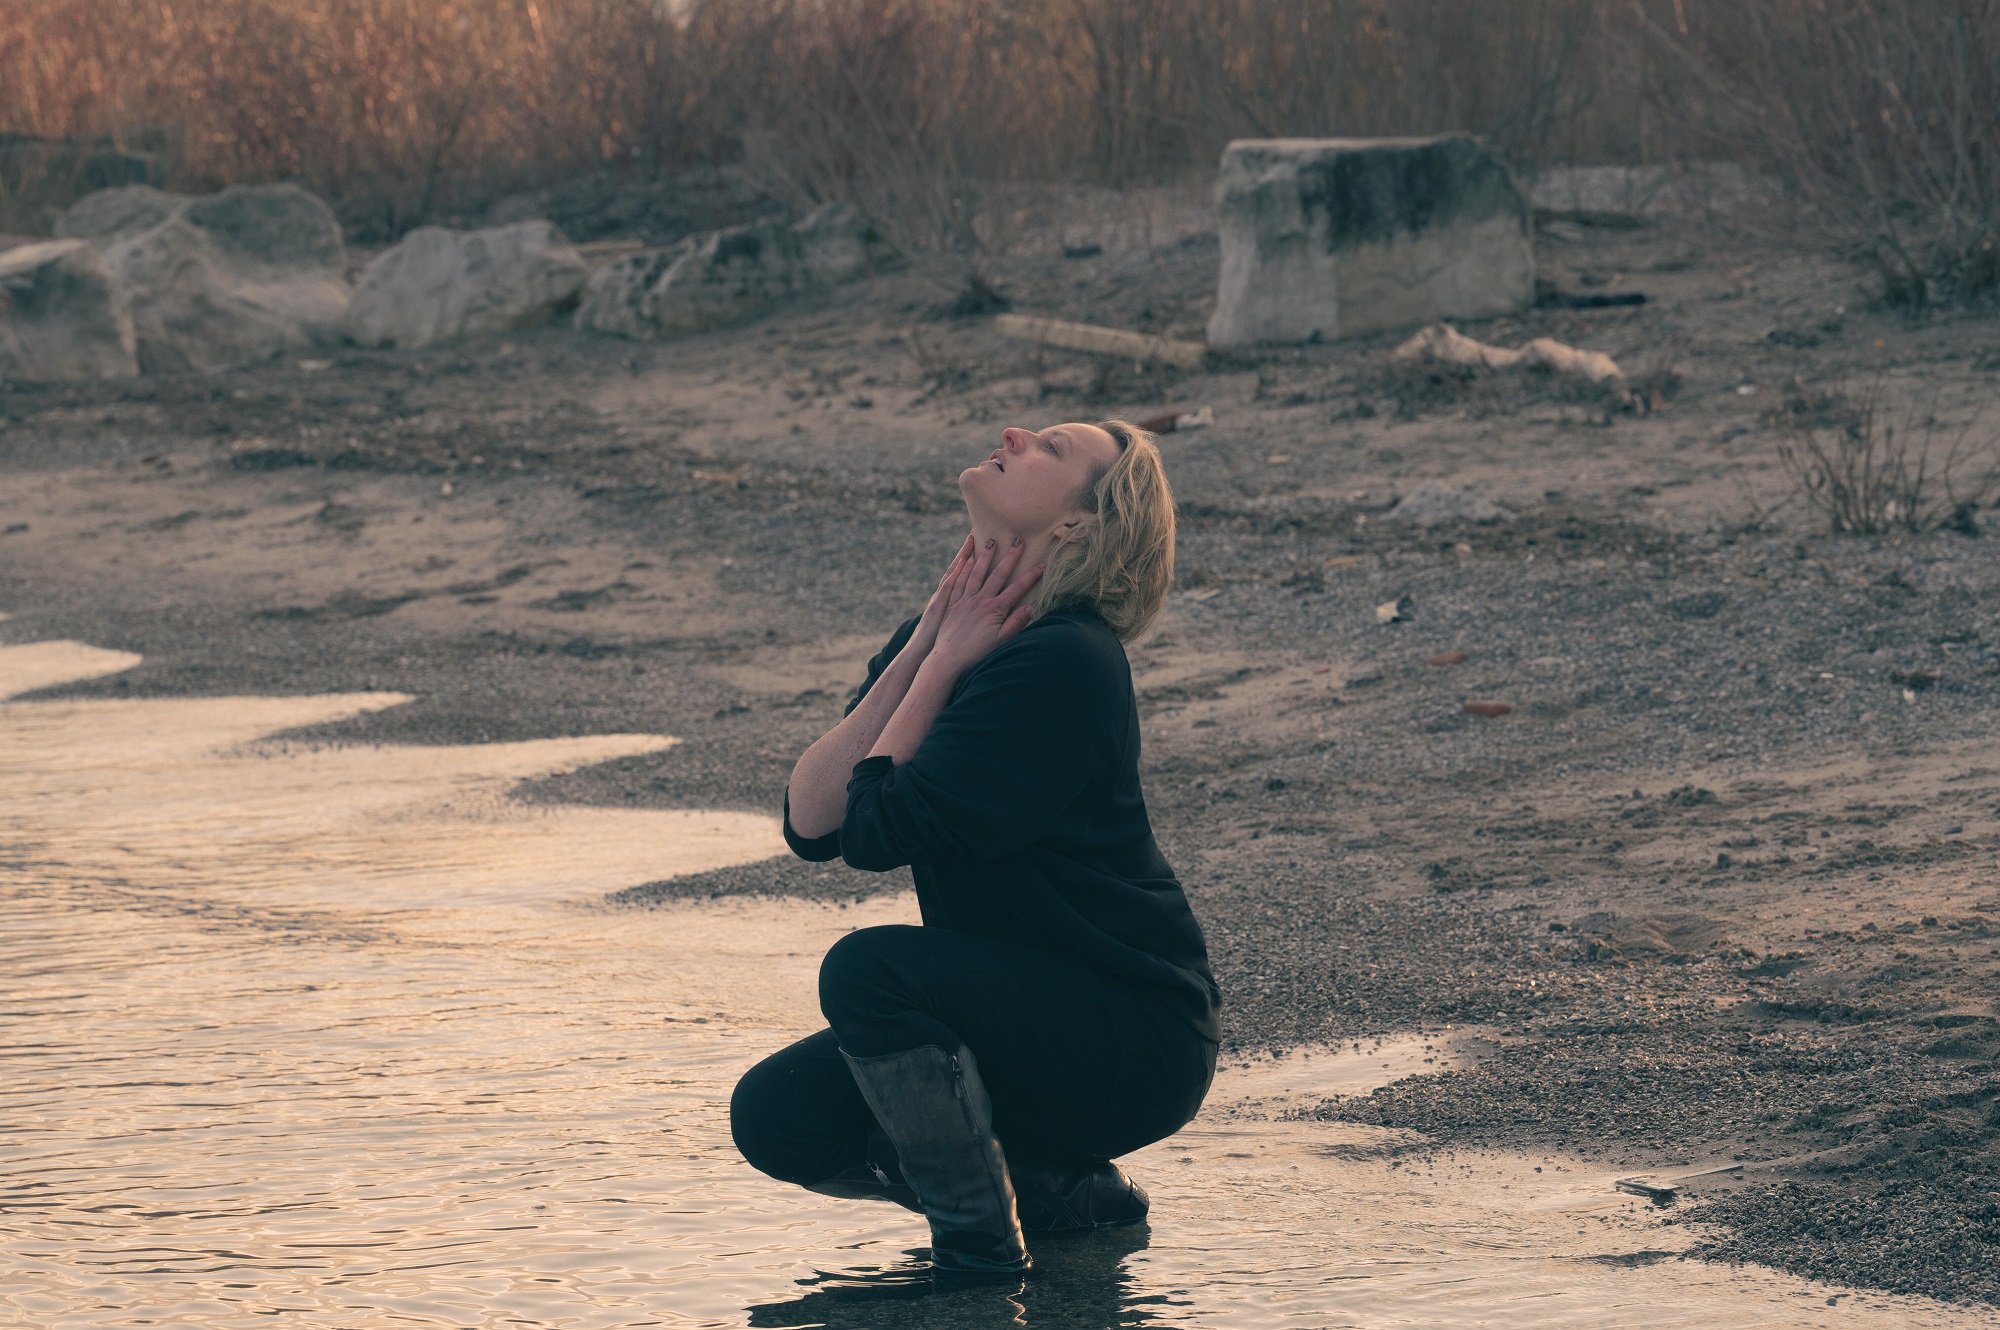 June crouches in water in season 5 of 'The Handmaid's Tale'